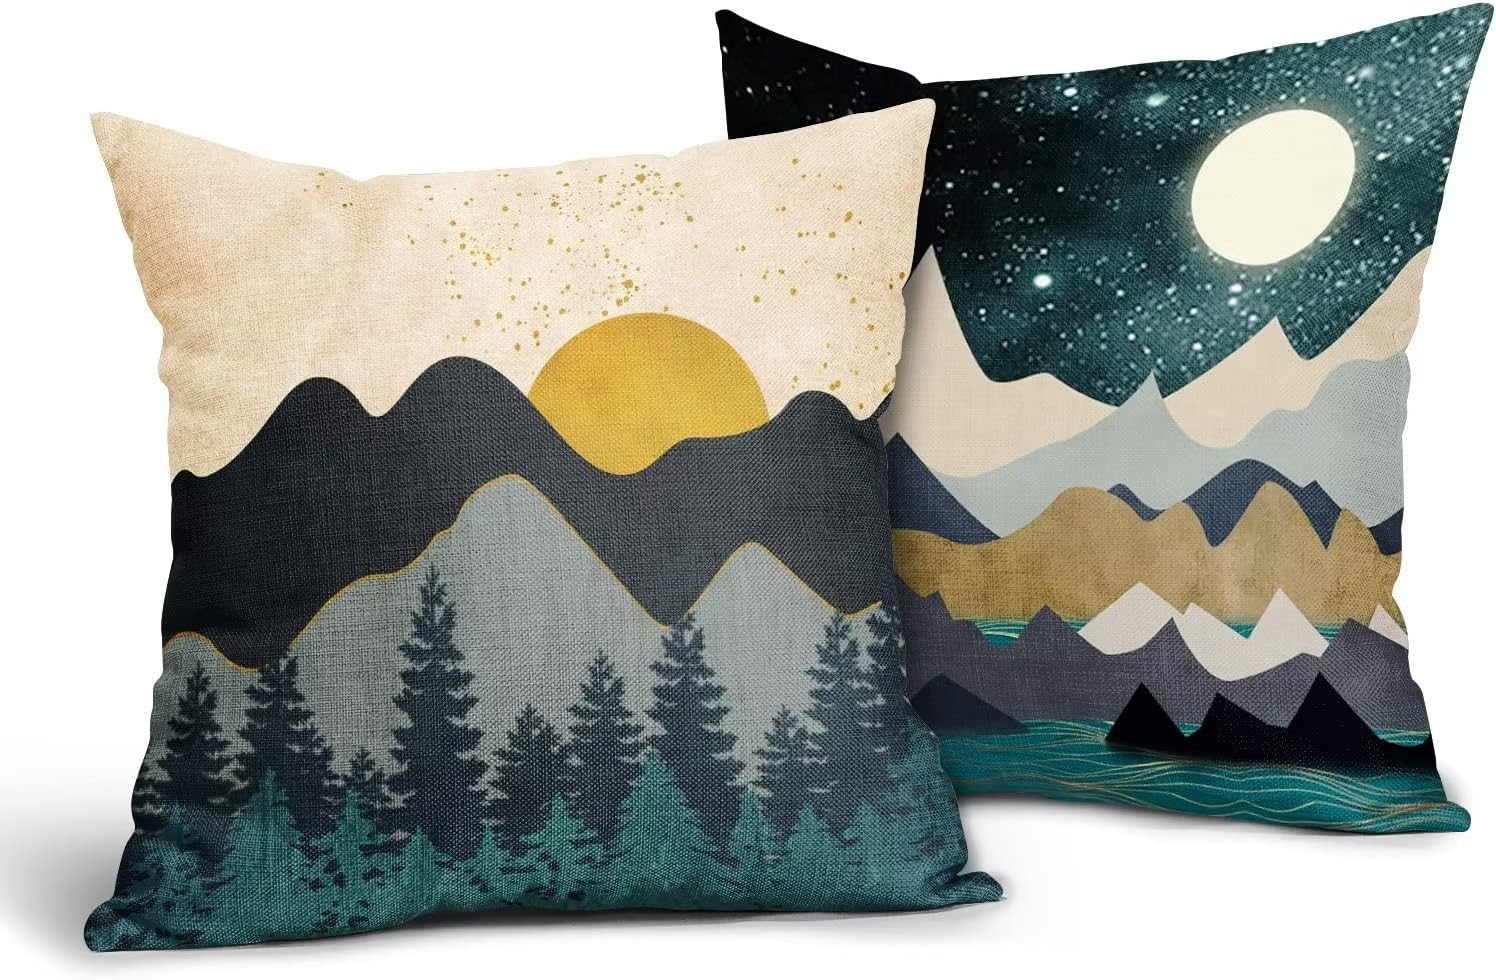 ABSOP Abstract Boho Throw Pillow Covers 18x18 Inch Set of 2 Mountain Nature Landscape Sunset Forest Linen Pillow Covers Modern Cushion Case for Home Sofa Couch Bed Outdoor Indoor Decoration